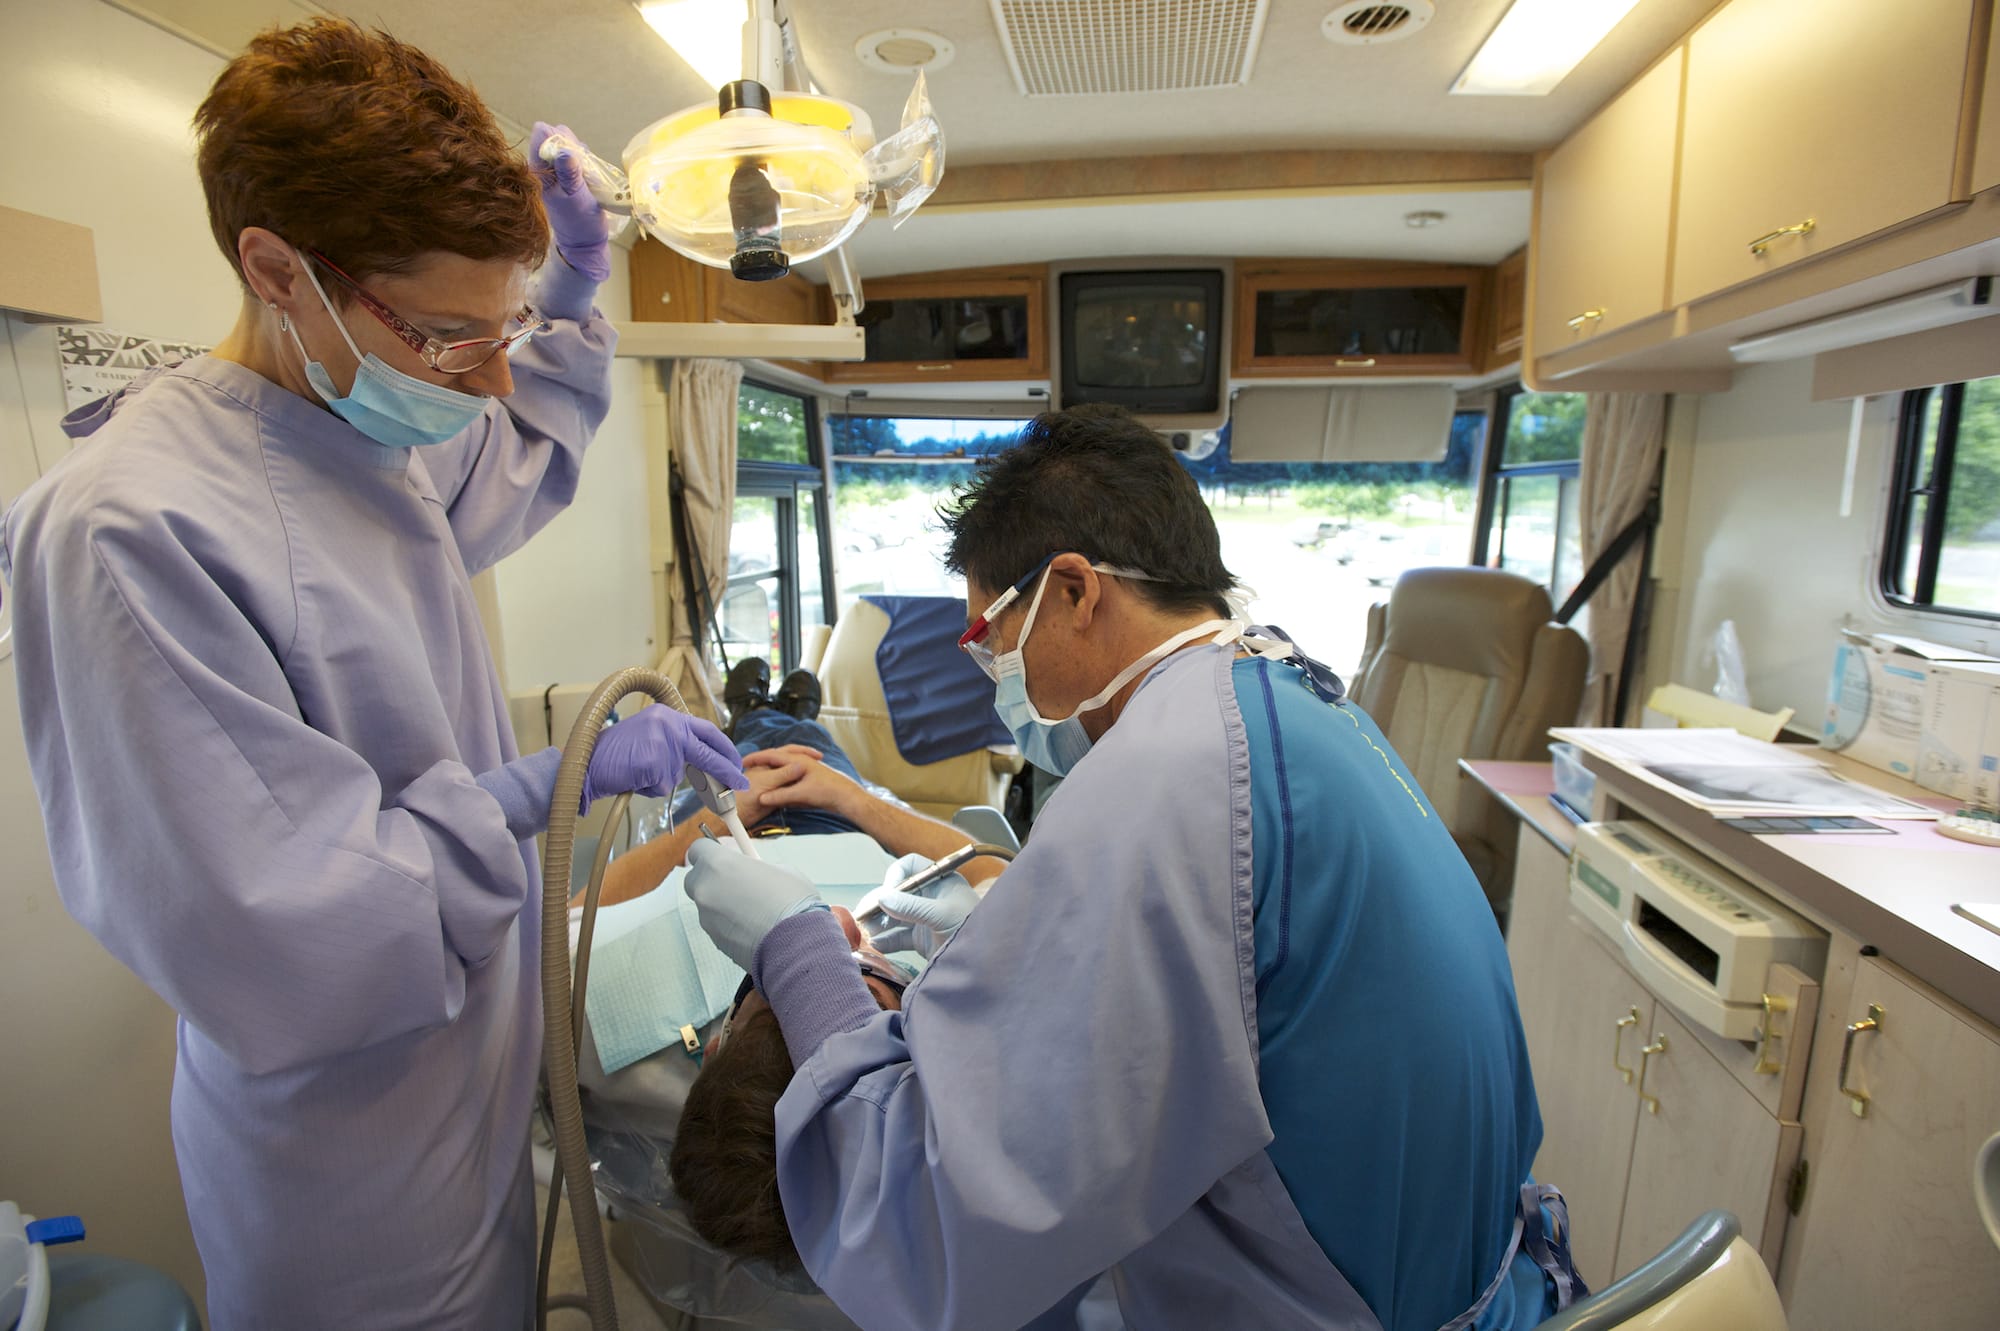 Dentist Martin Hikido, right, and dental assistant Terri Erickson tend to patient Randy Hash in a dental van.